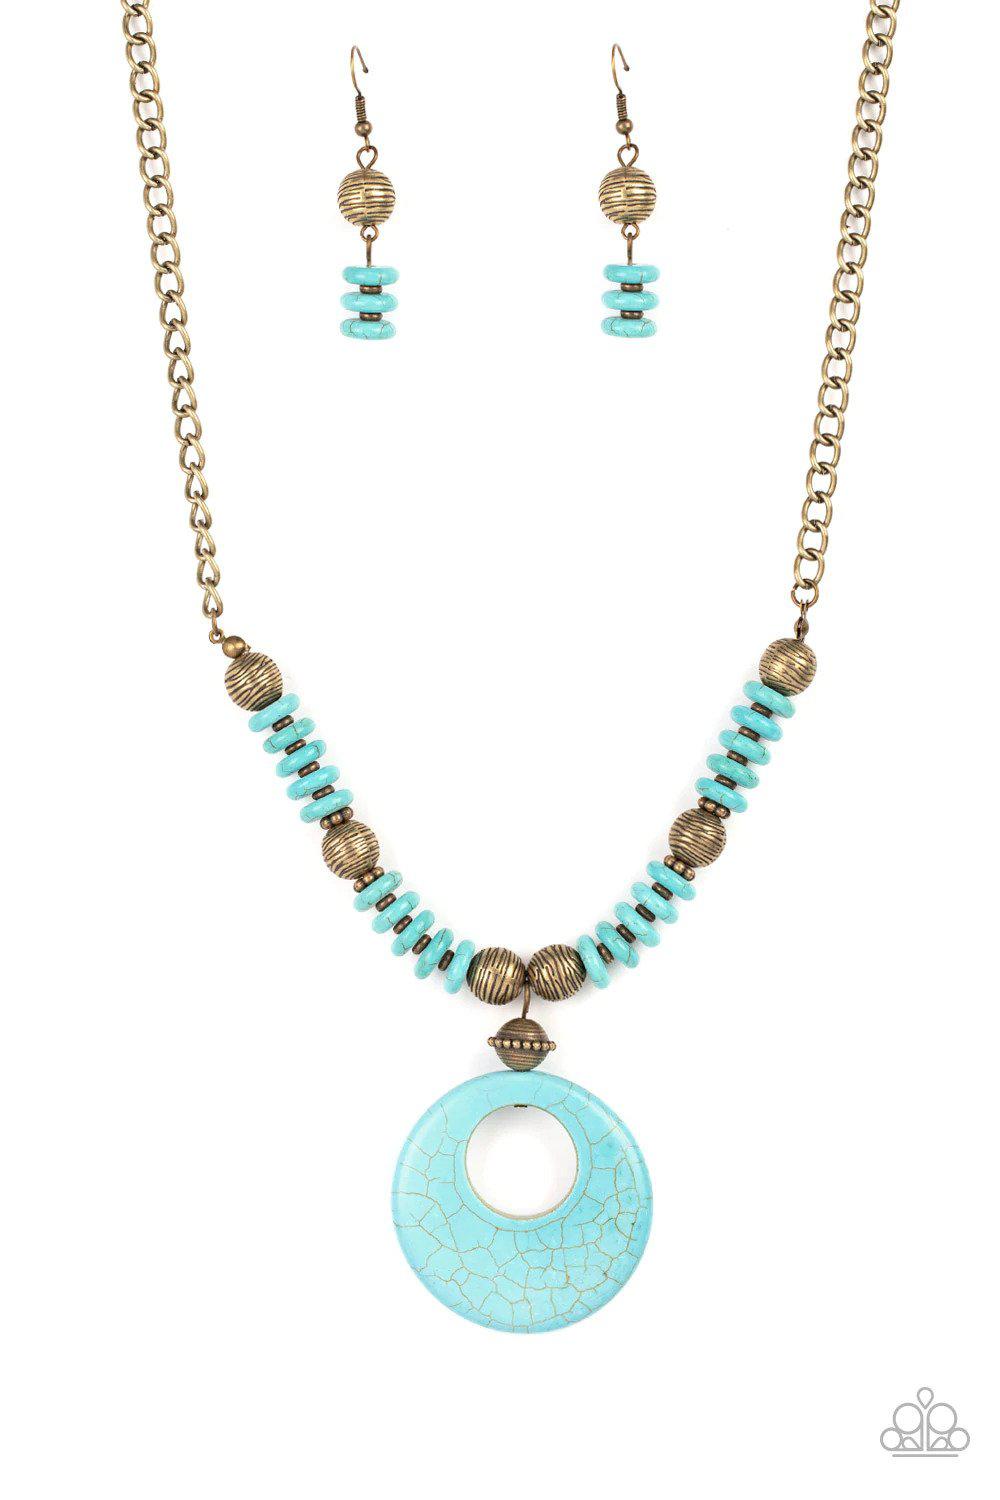 Oasis Goddess Brass Necklace - Paparazzi Accessories- lightbox - CarasShop.com - $5 Jewelry by Cara Jewels